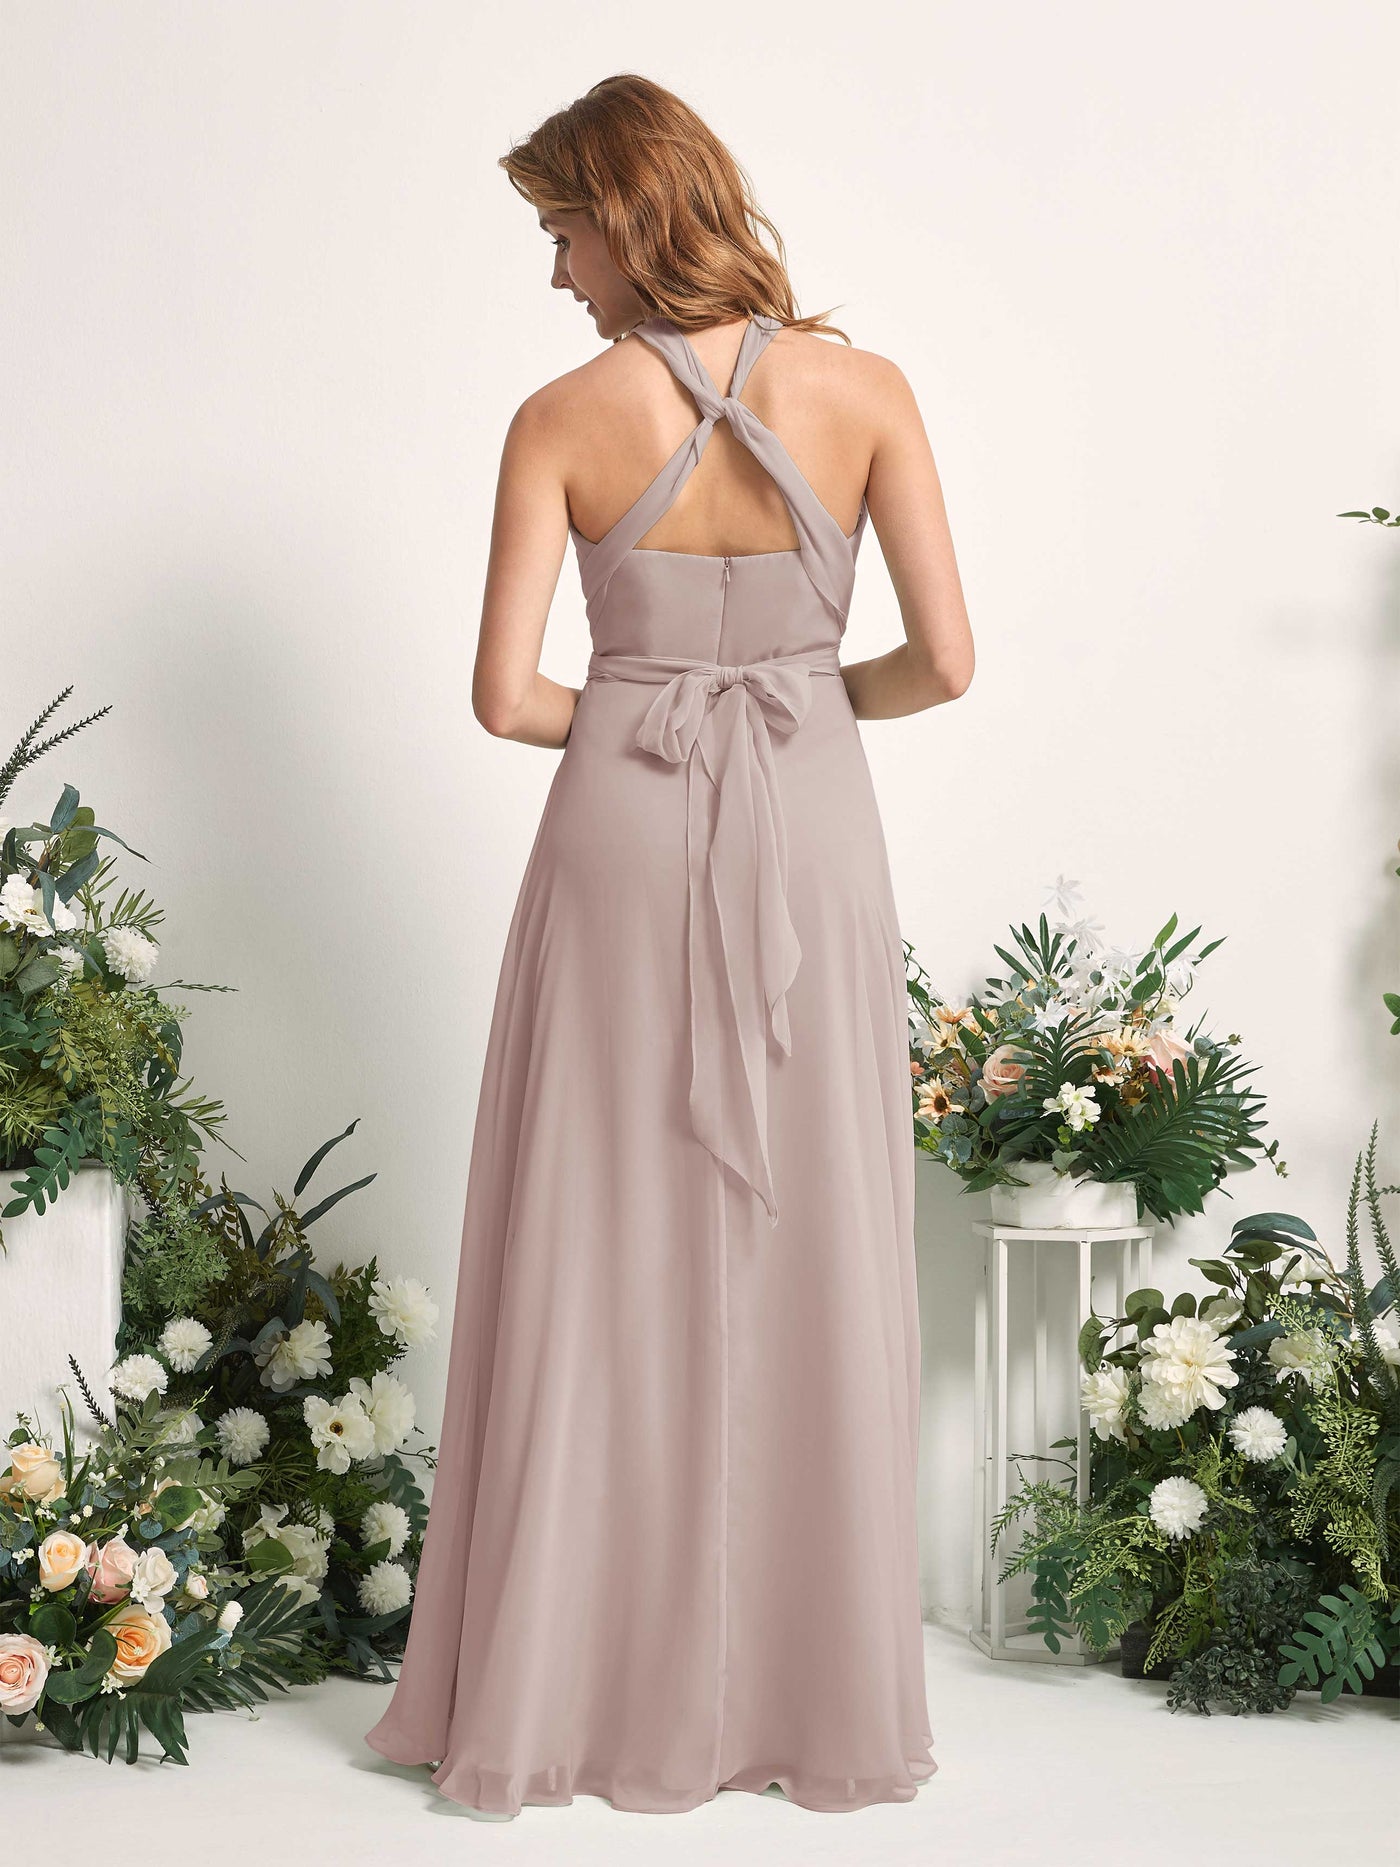 Taupe Bridesmaid Dresses Bridesmaid Dress A-line Chiffon Halter Full Length Short Sleeves Wedding Party Dress (81226324)#color_taupe